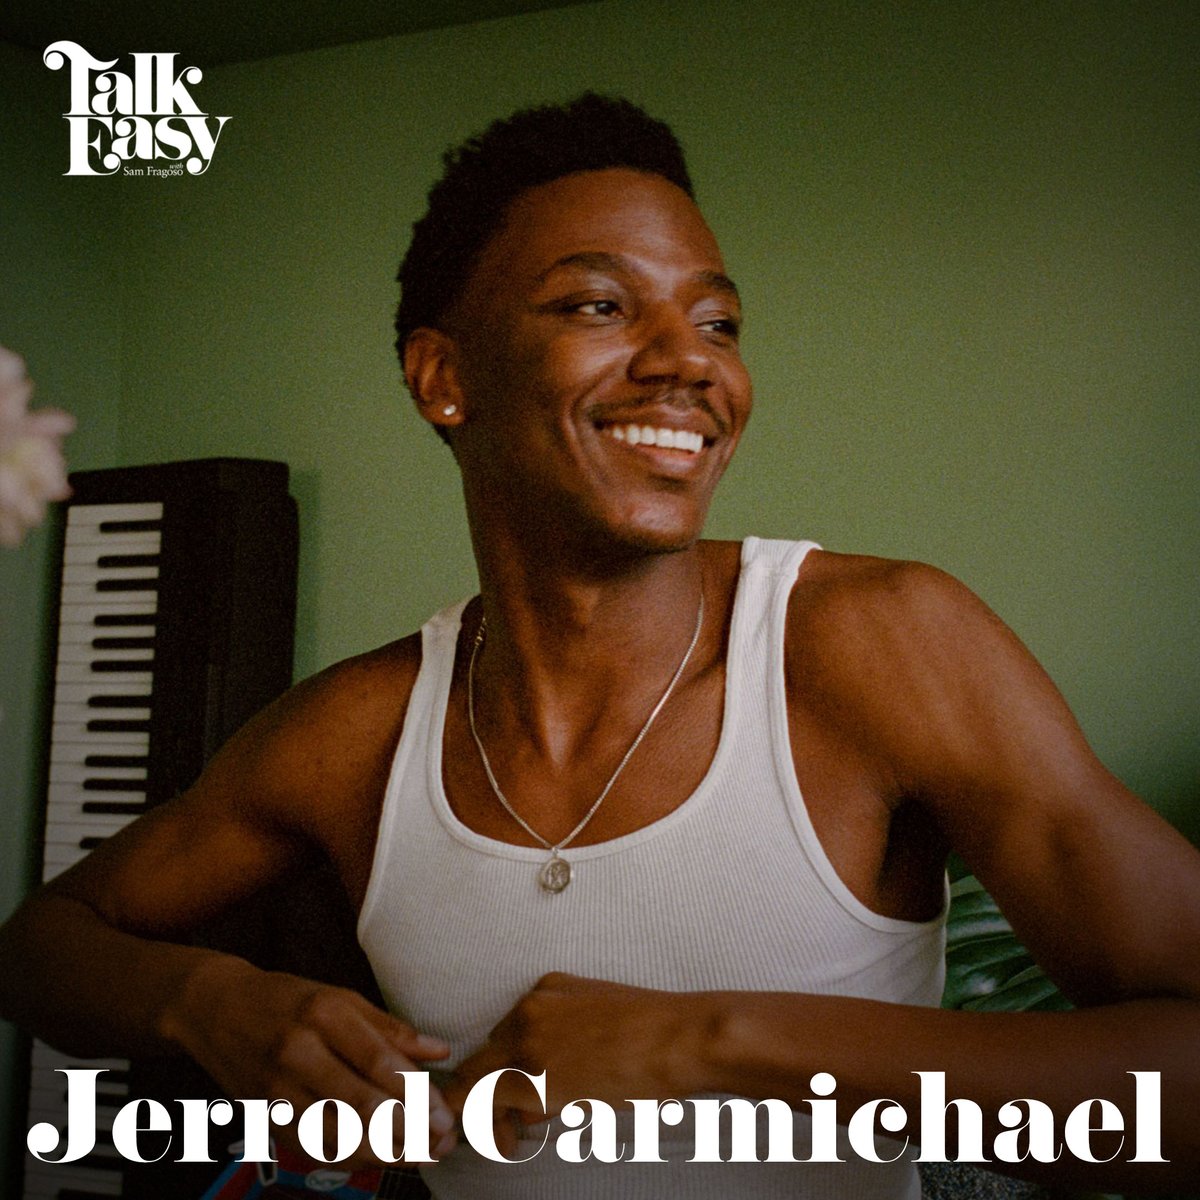 This Sunday, our guest is Jerrod Carmichael.